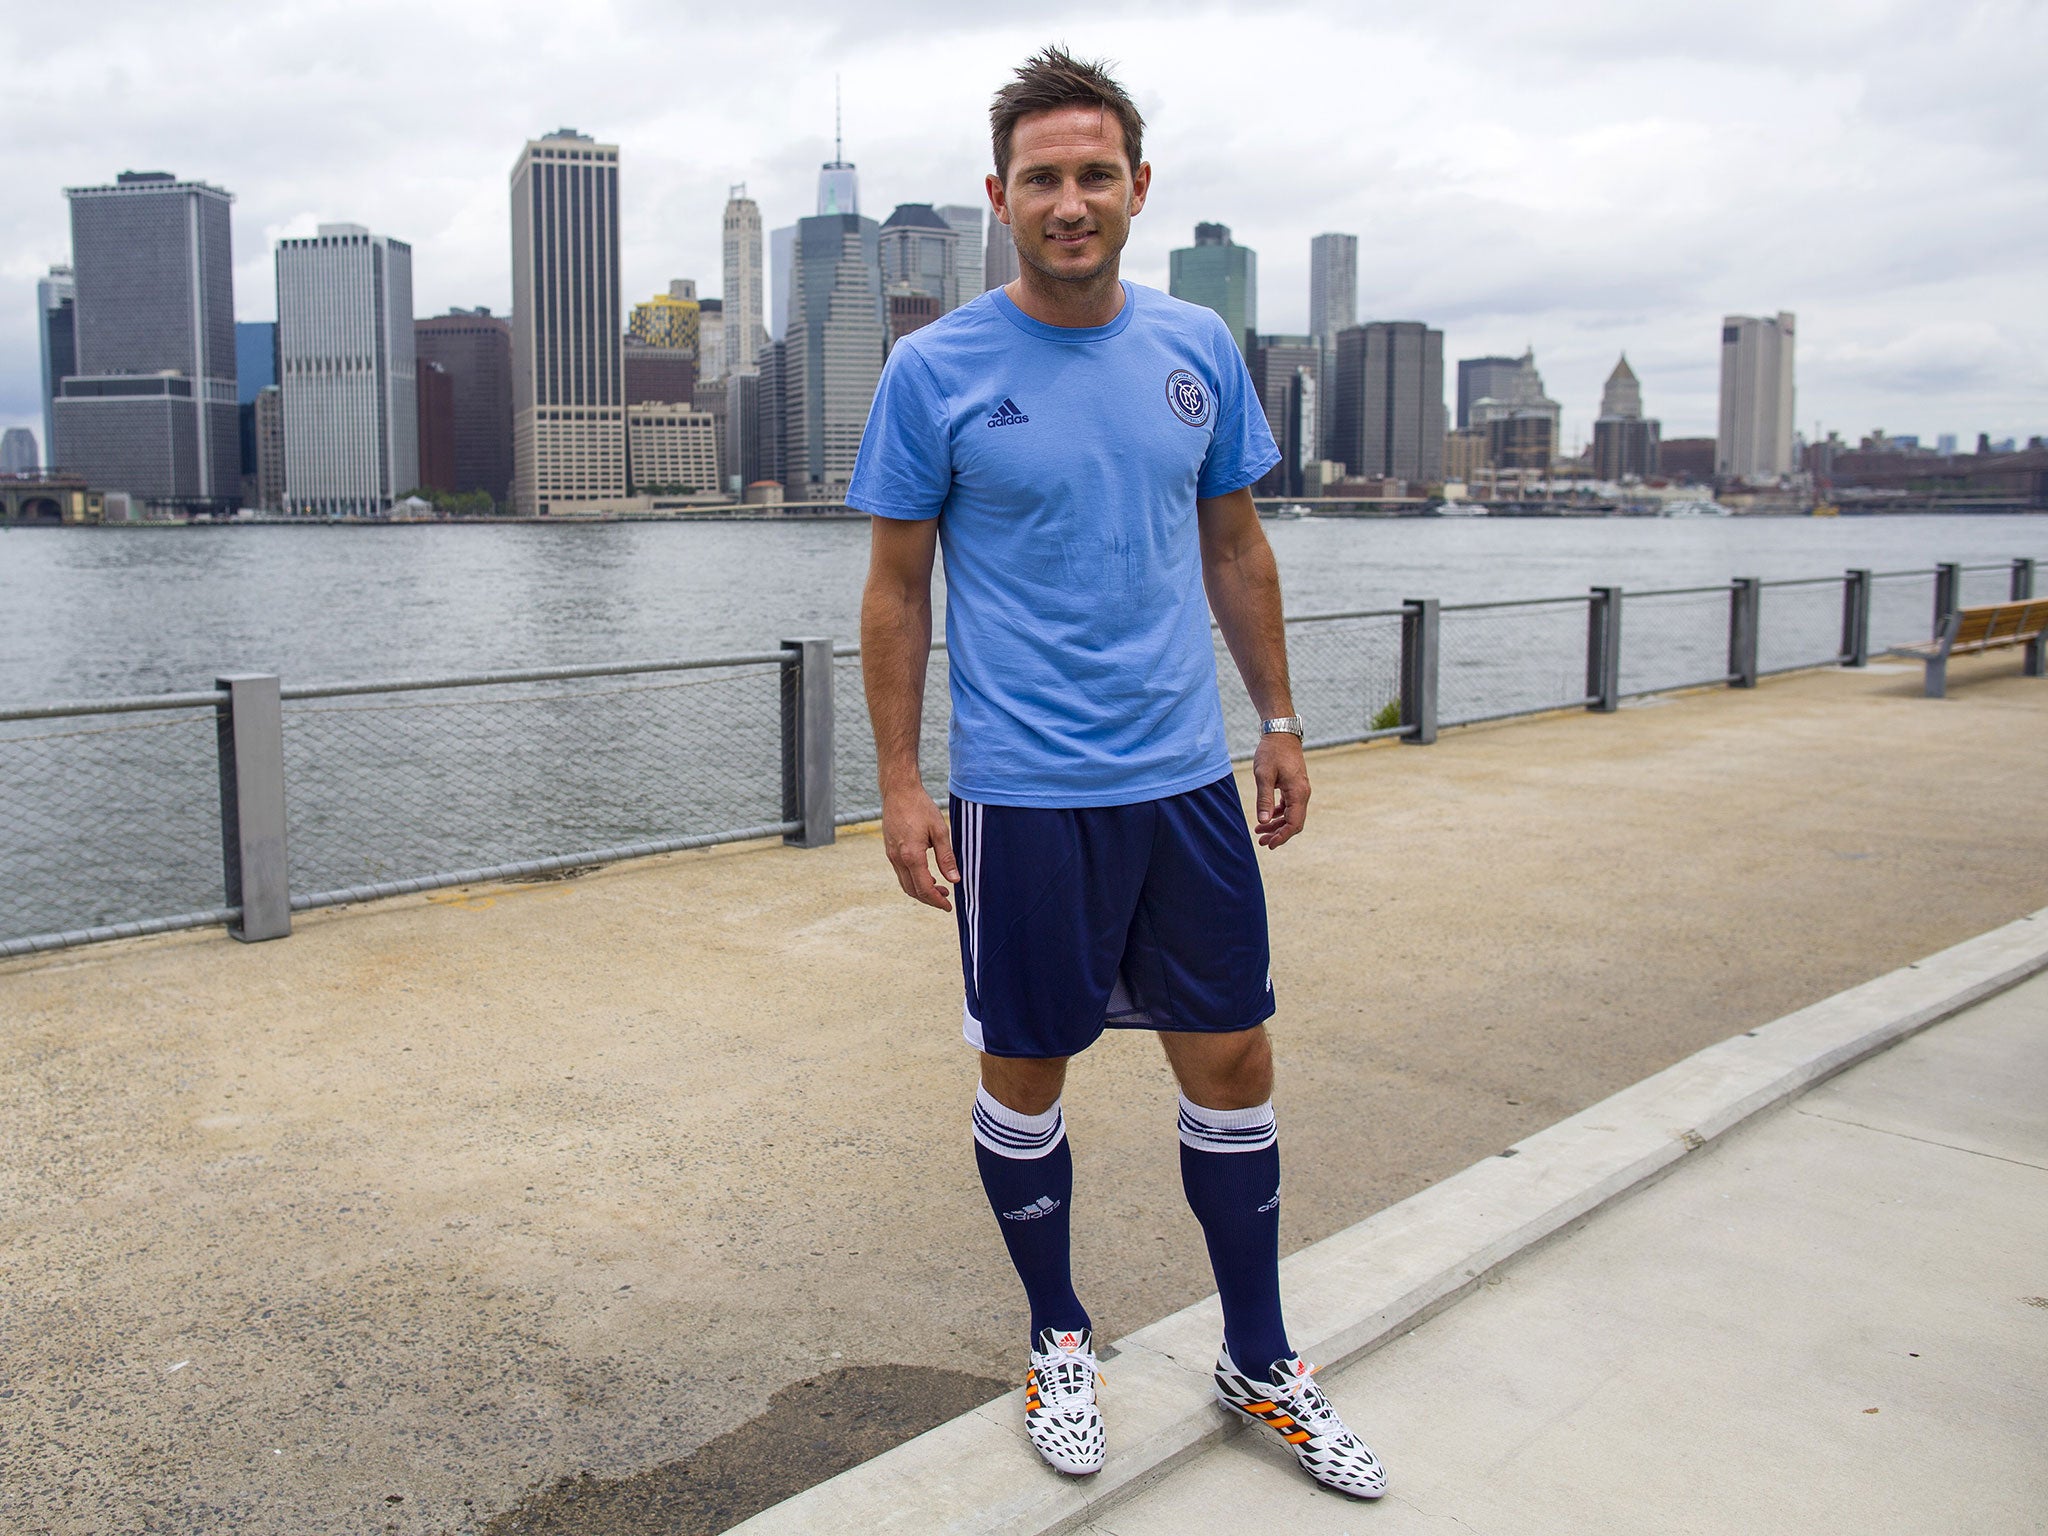 Lampard joined New York City FC